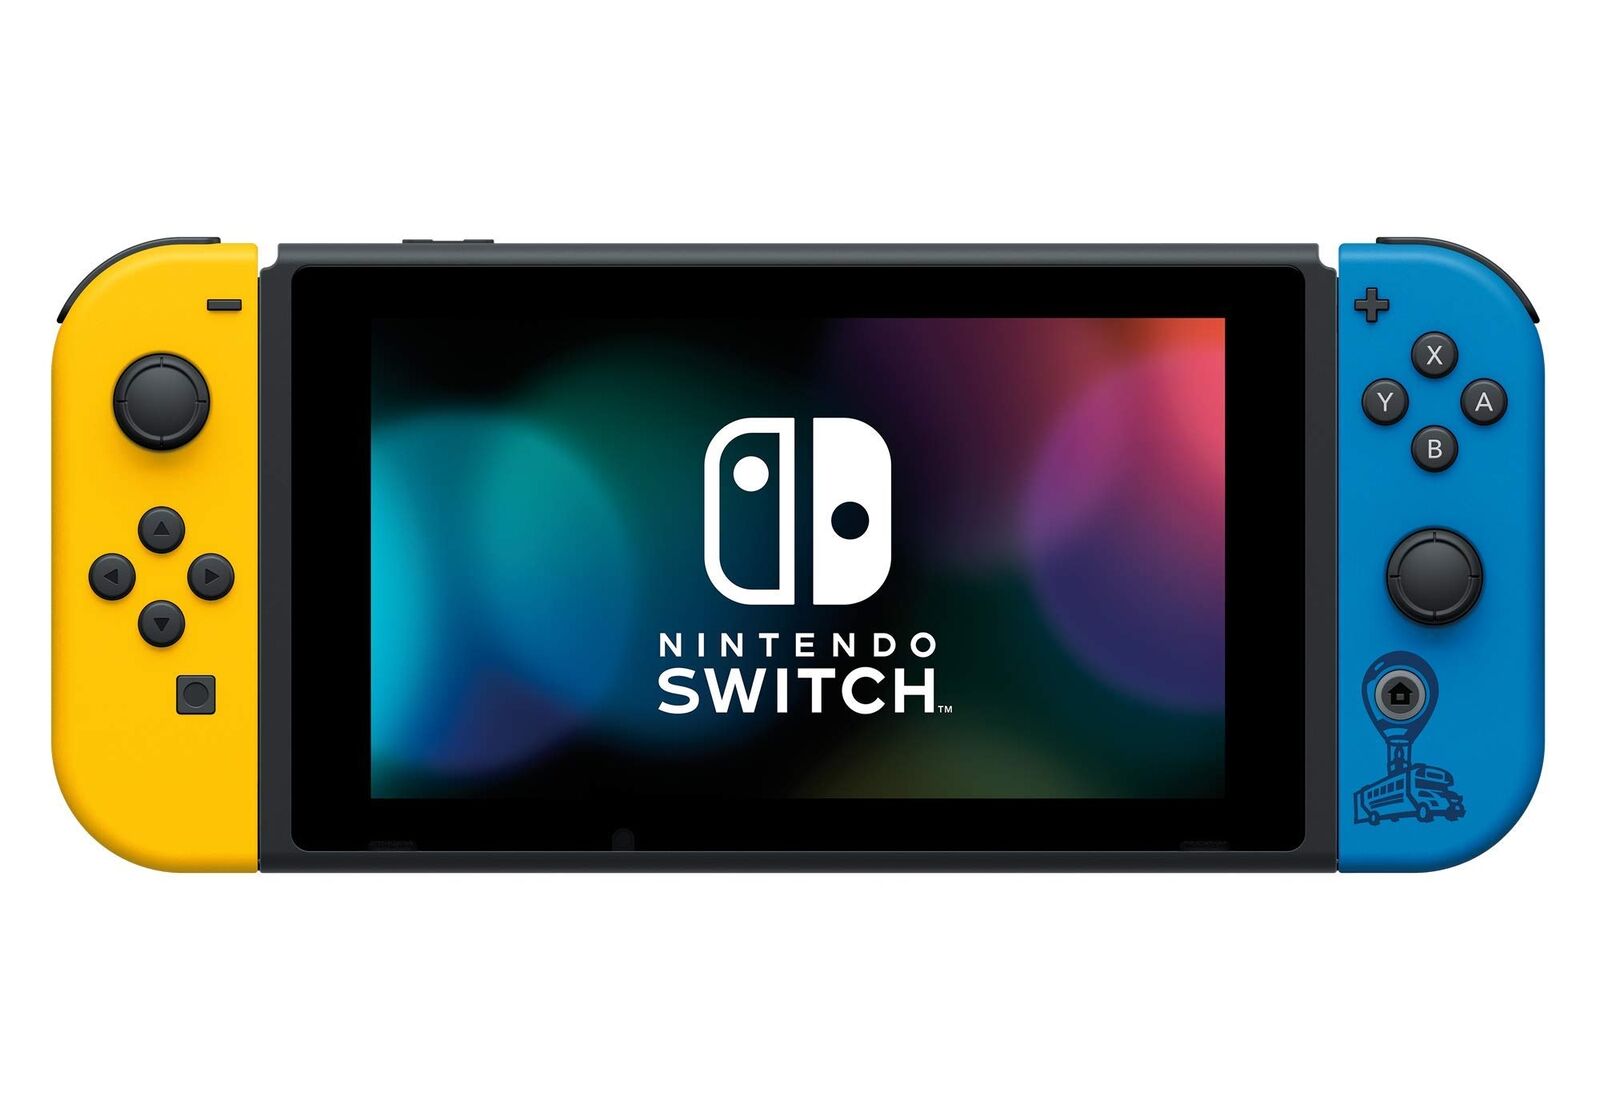 Nintendo switch with yellow and blue Joy-Con.